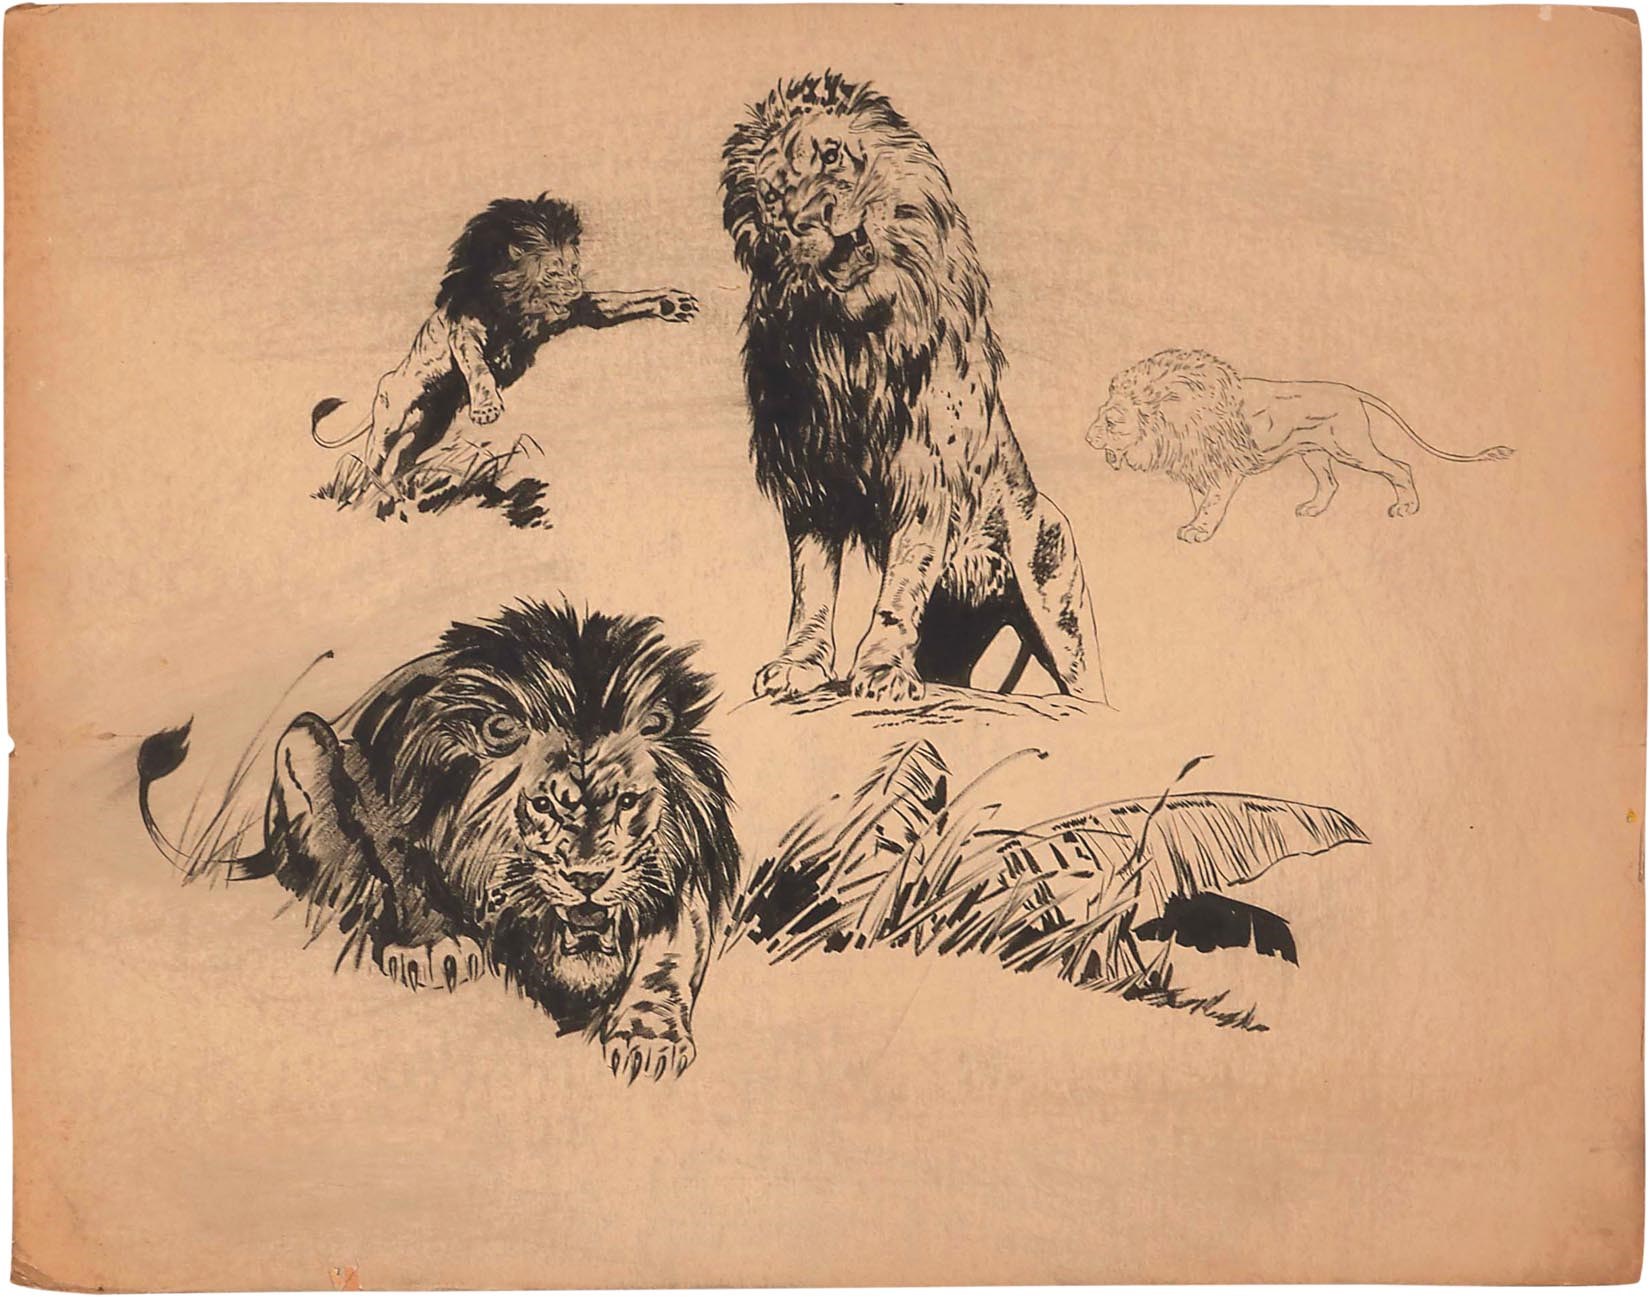 The New Yorker Collection - Early 1930s Tarzan "Lion" Character Study Guide by Hal Foster